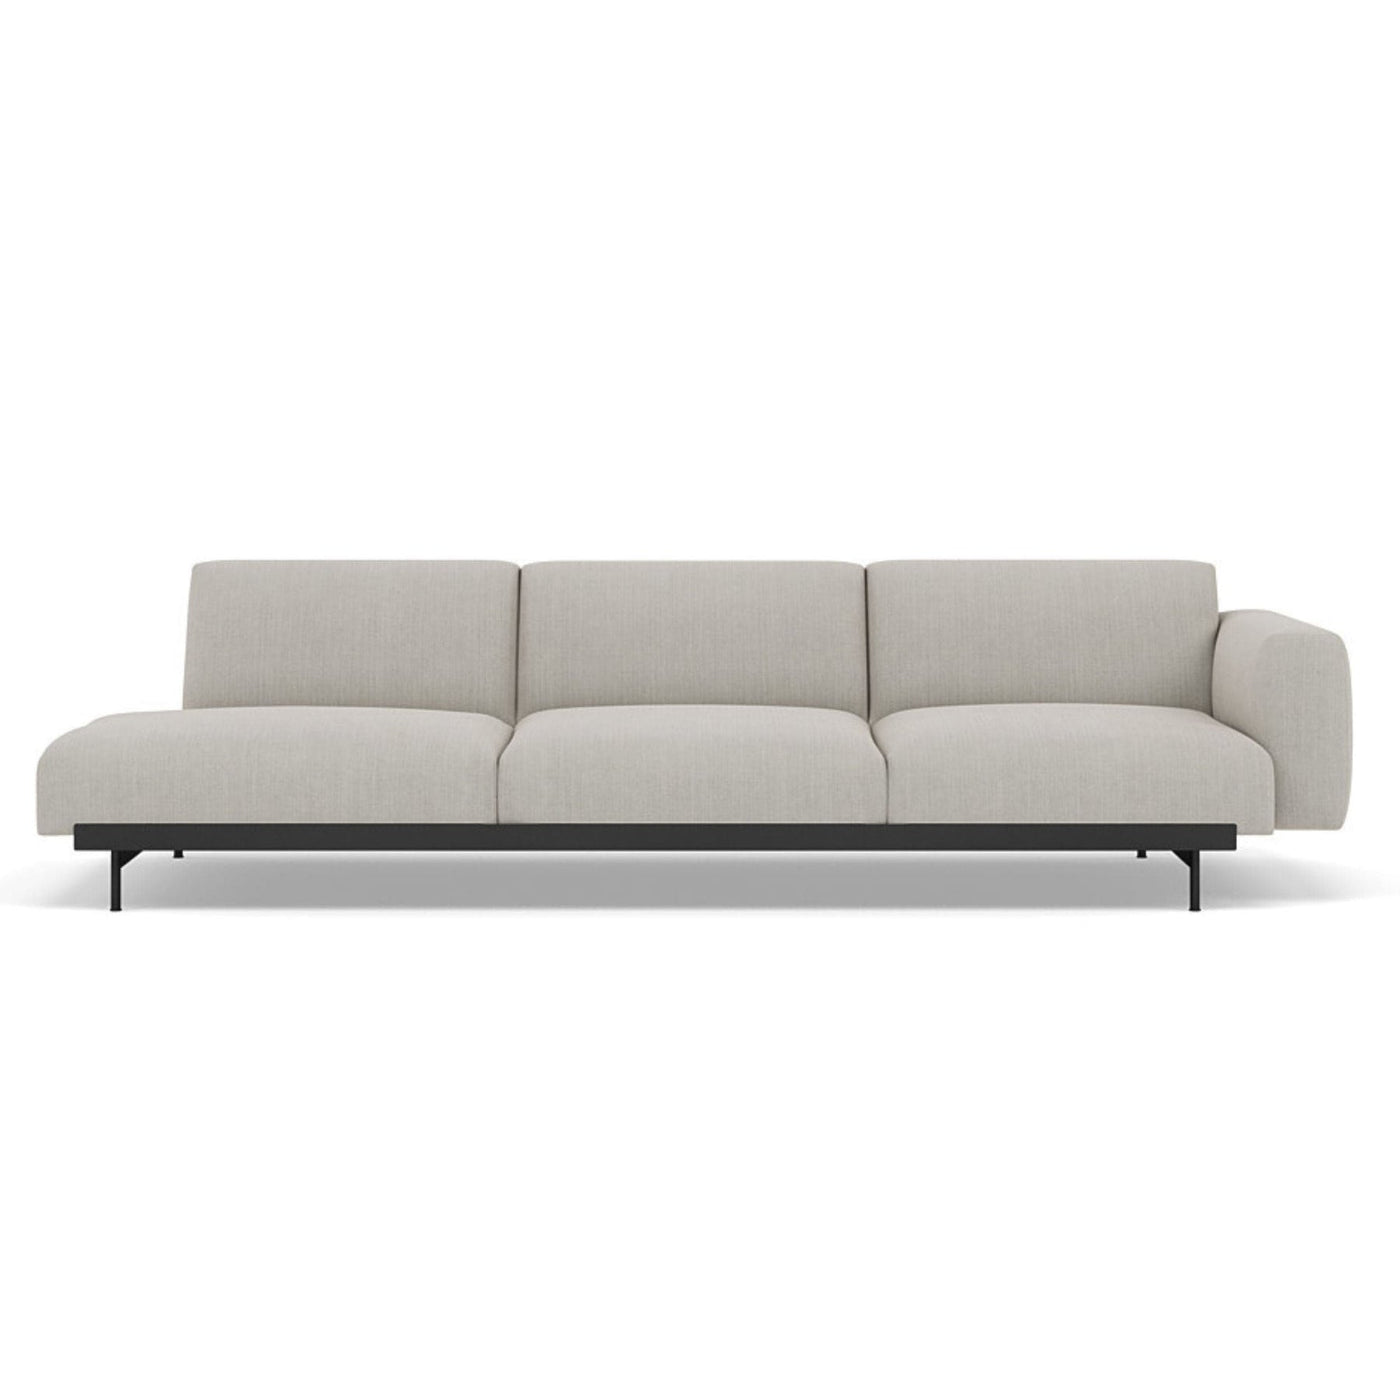 Muuto In Situ Modular 3 Seater Sofa, configuration 2. Made to order from someday designs. #colour_fiord-201